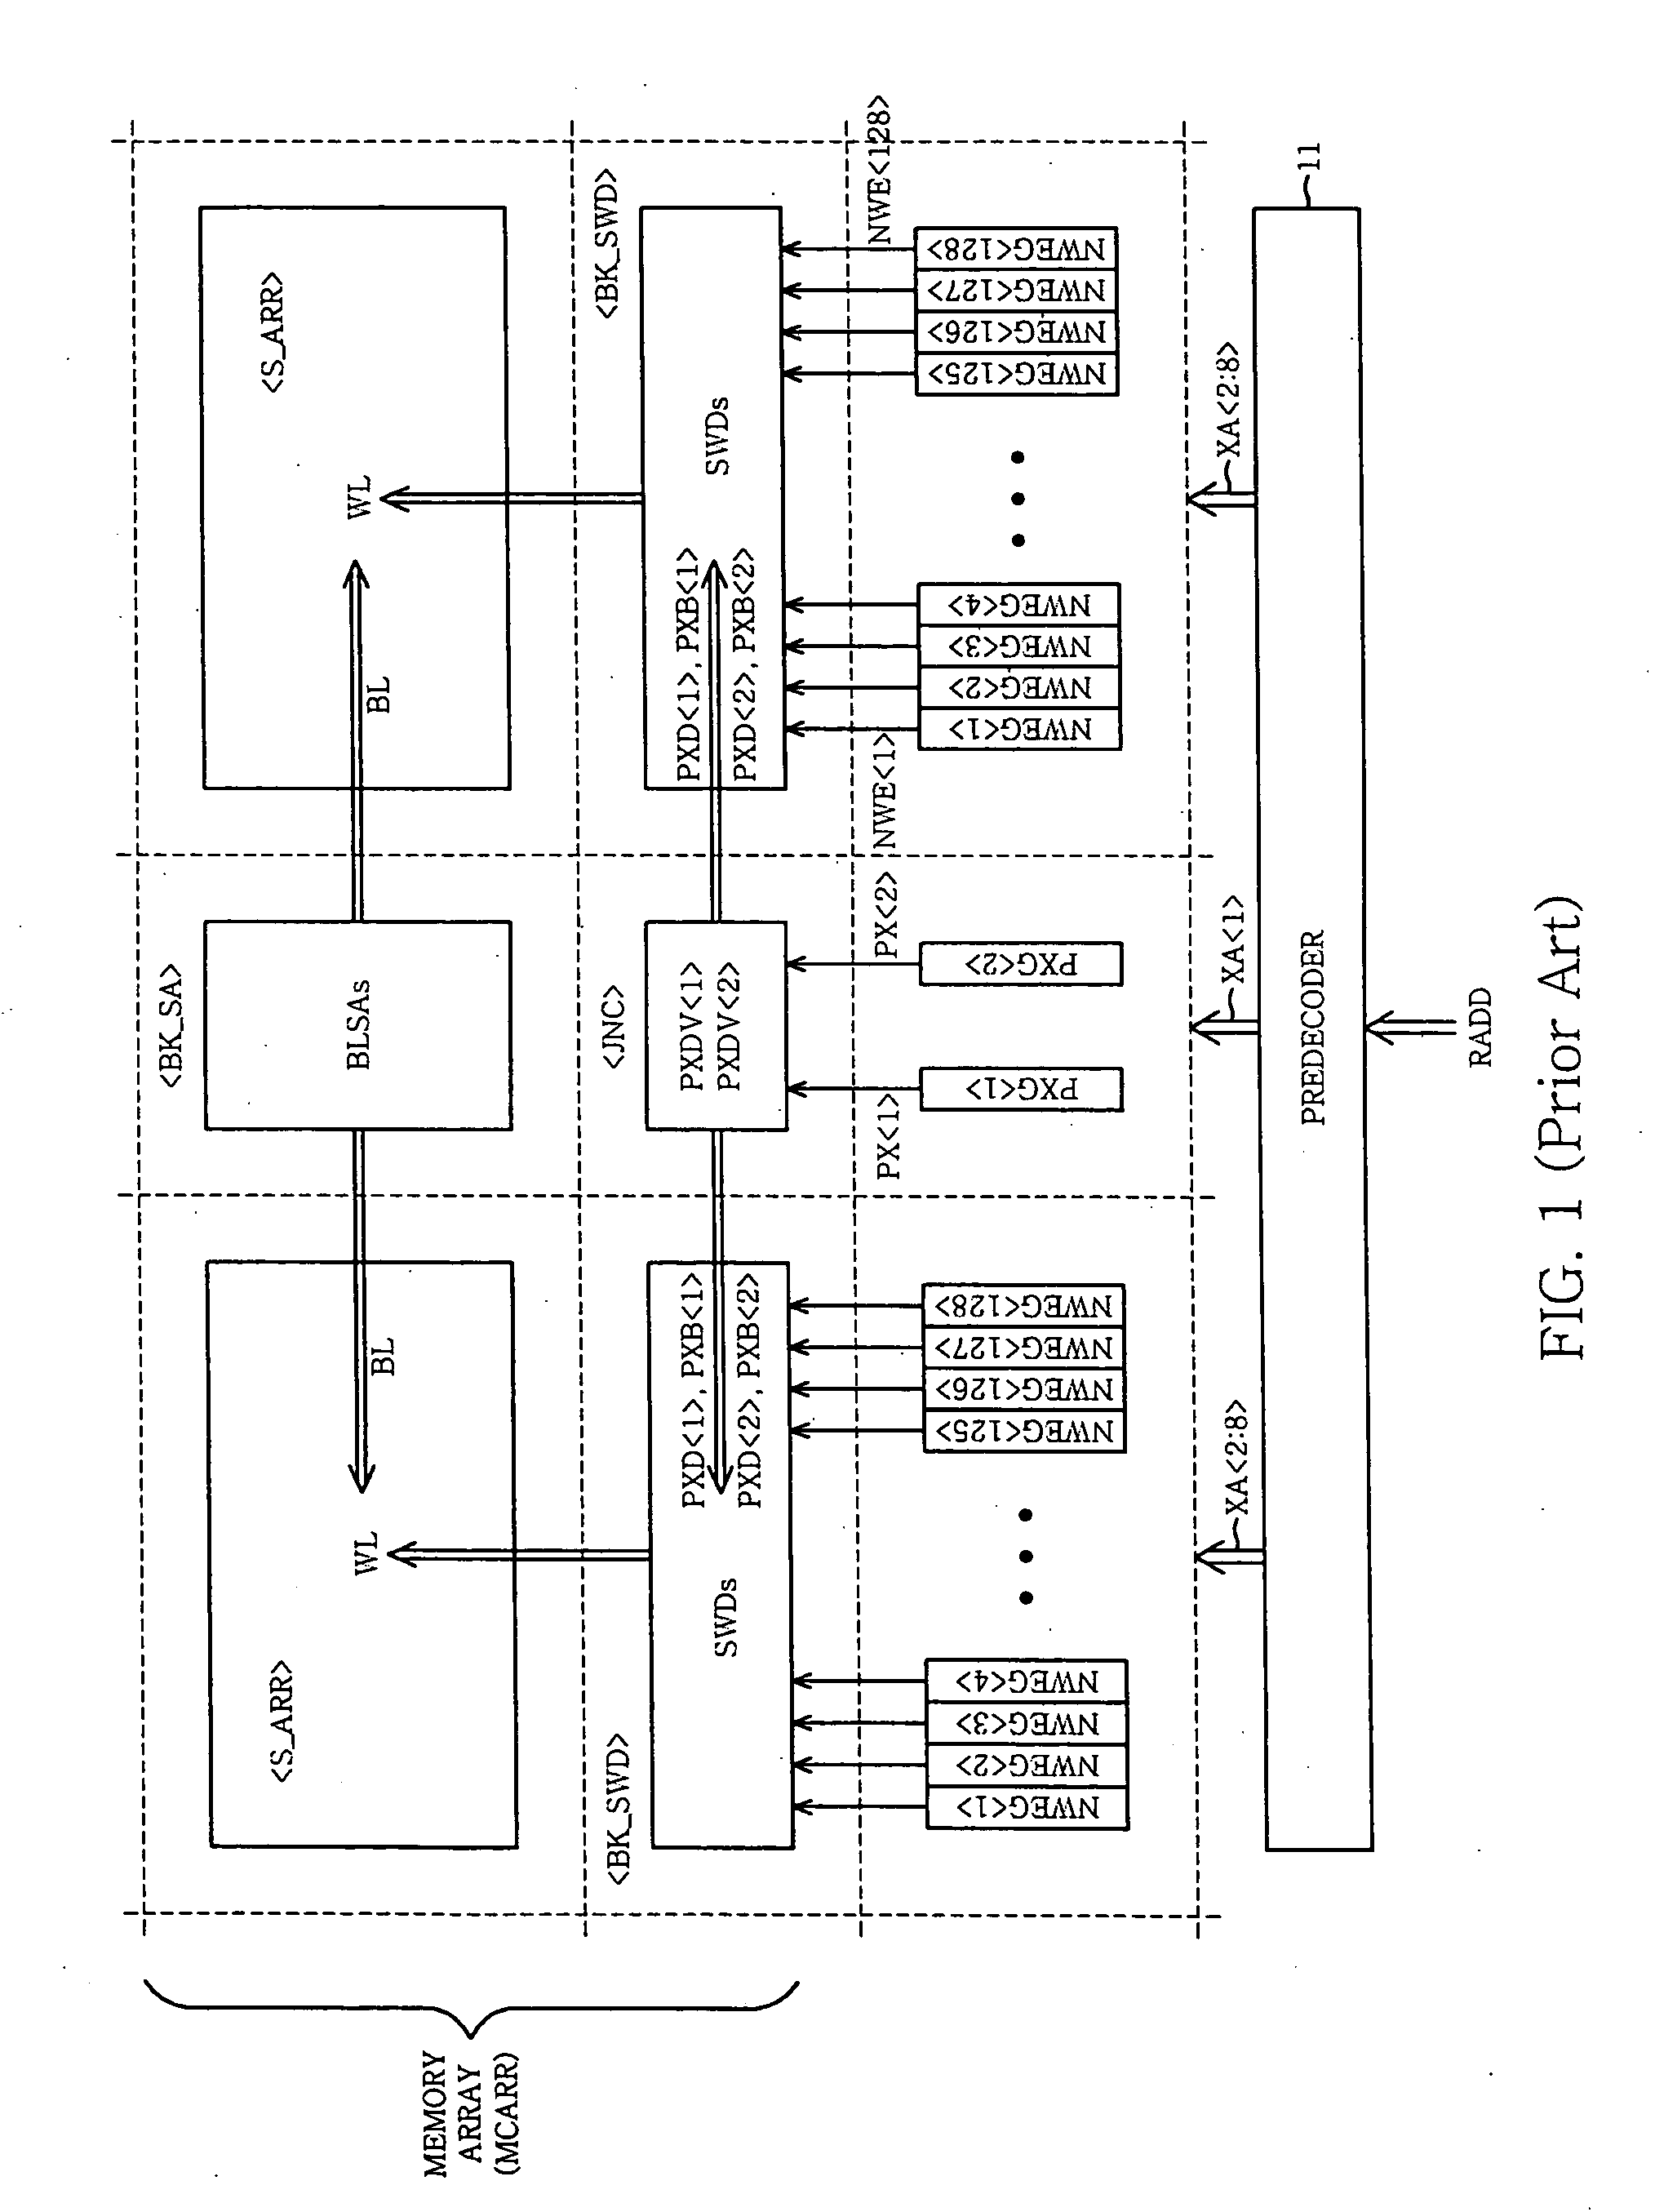 Semiconductor memory device adapted to communicate decoding signals in a word line direction